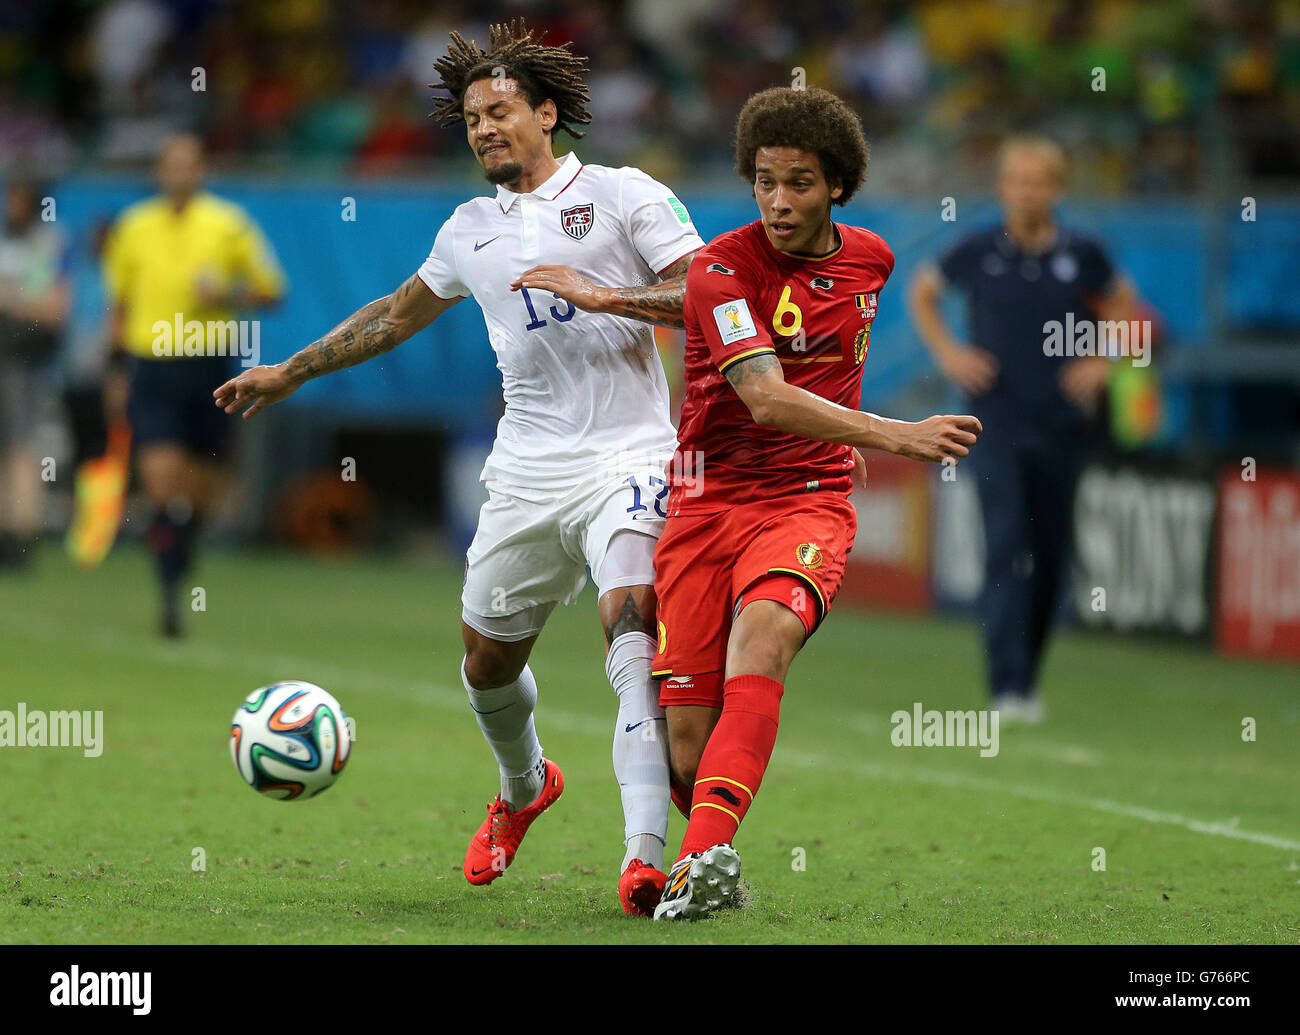 Soccer - FIFA World Cup 2014 - Round of 16 - Belgium v USA - Arena Fonte Nova. USA's Jermaine Jones and Belgium's Axel Witsel (right) in action Stock Photo